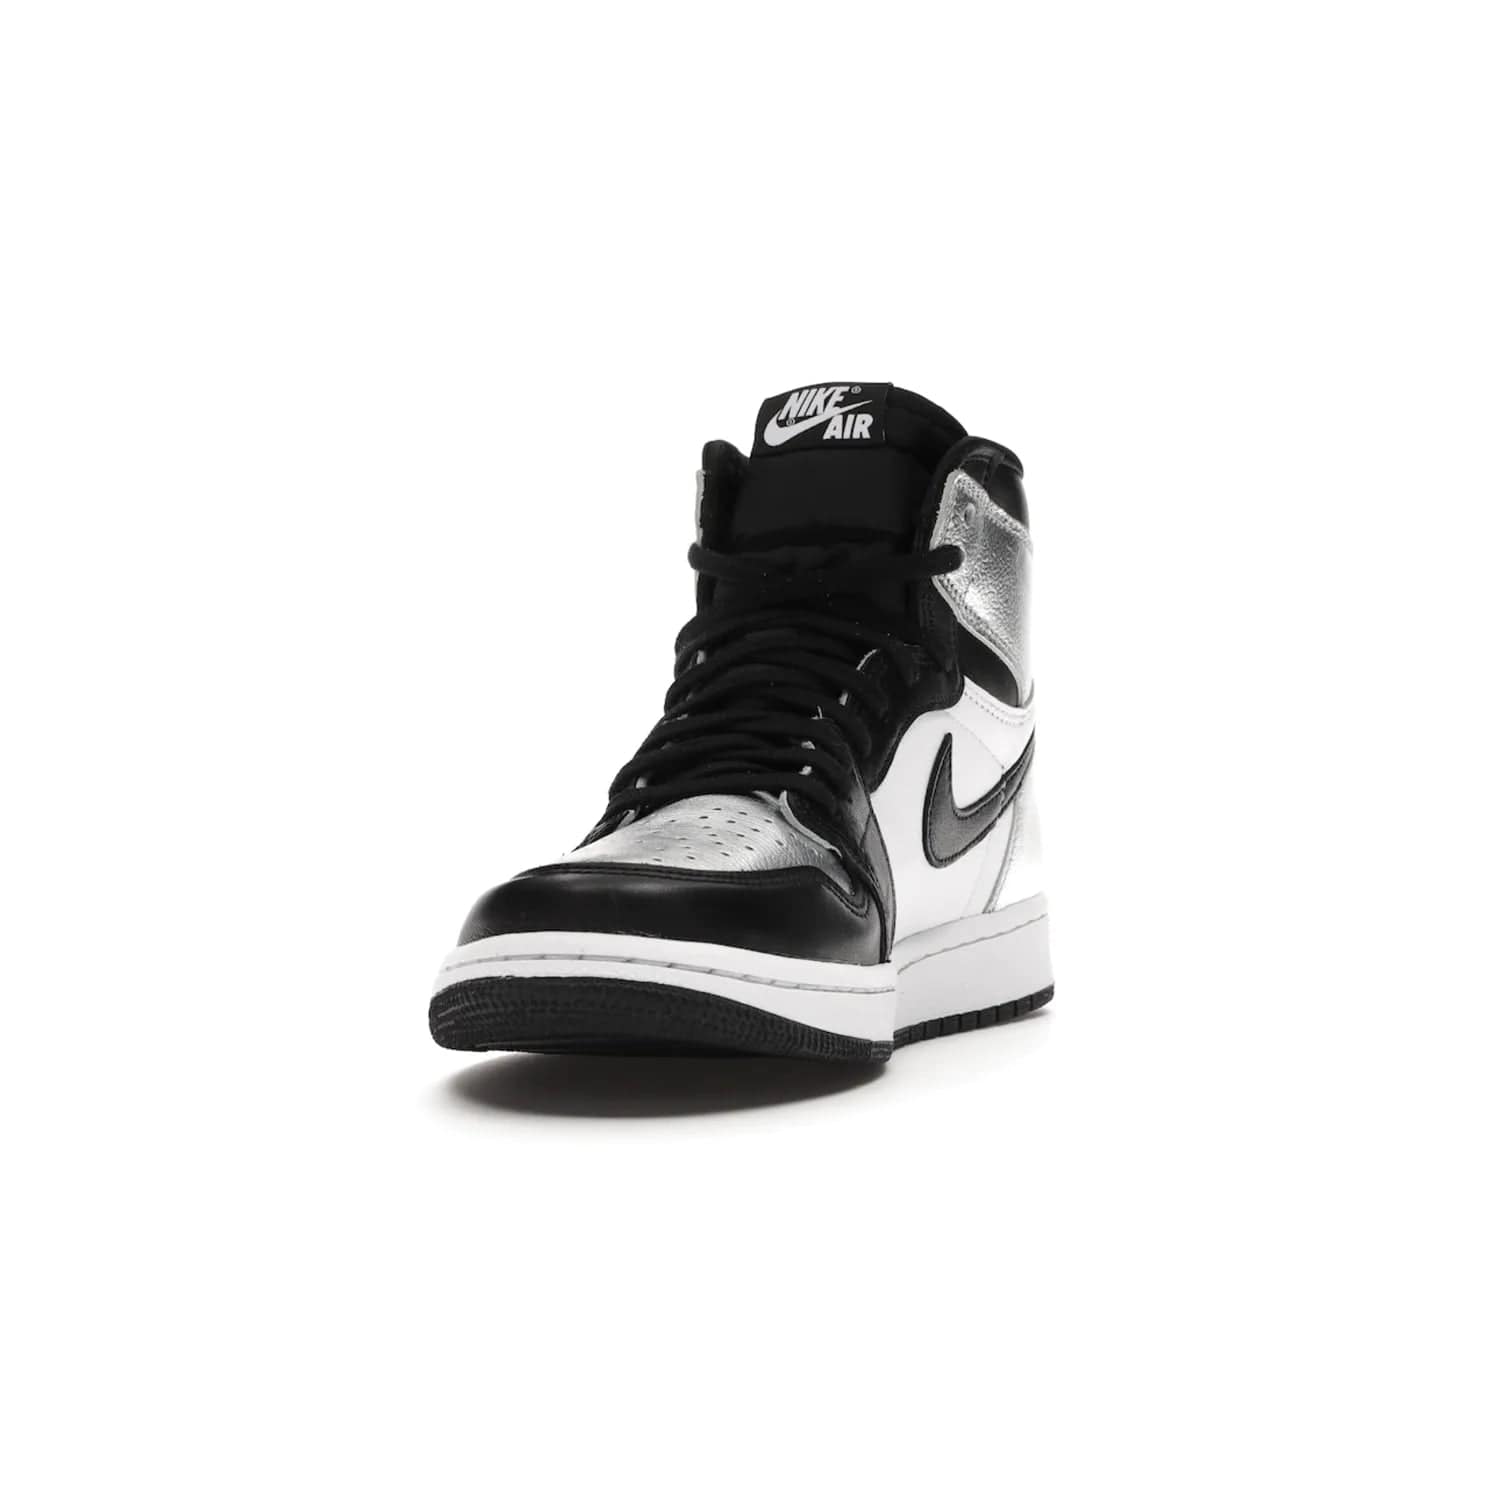 Jordan 1 Retro High Silver Toe (Women's) - Image 12 - Only at www.BallersClubKickz.com - Introducing the Jordan 1 Retro High Silver Toe (Women's): an updated spin on the iconic 'Black Toe' theme. Featuring white & black leather and silver patent leather construction. Nike Air branding, Air Jordan Wings logo, and white/black sole finish give a classic look. The perfect addition to an on-trend streetwear look. Available in classic black & white, this Jordan 1 is an instant classic. Released in February 20